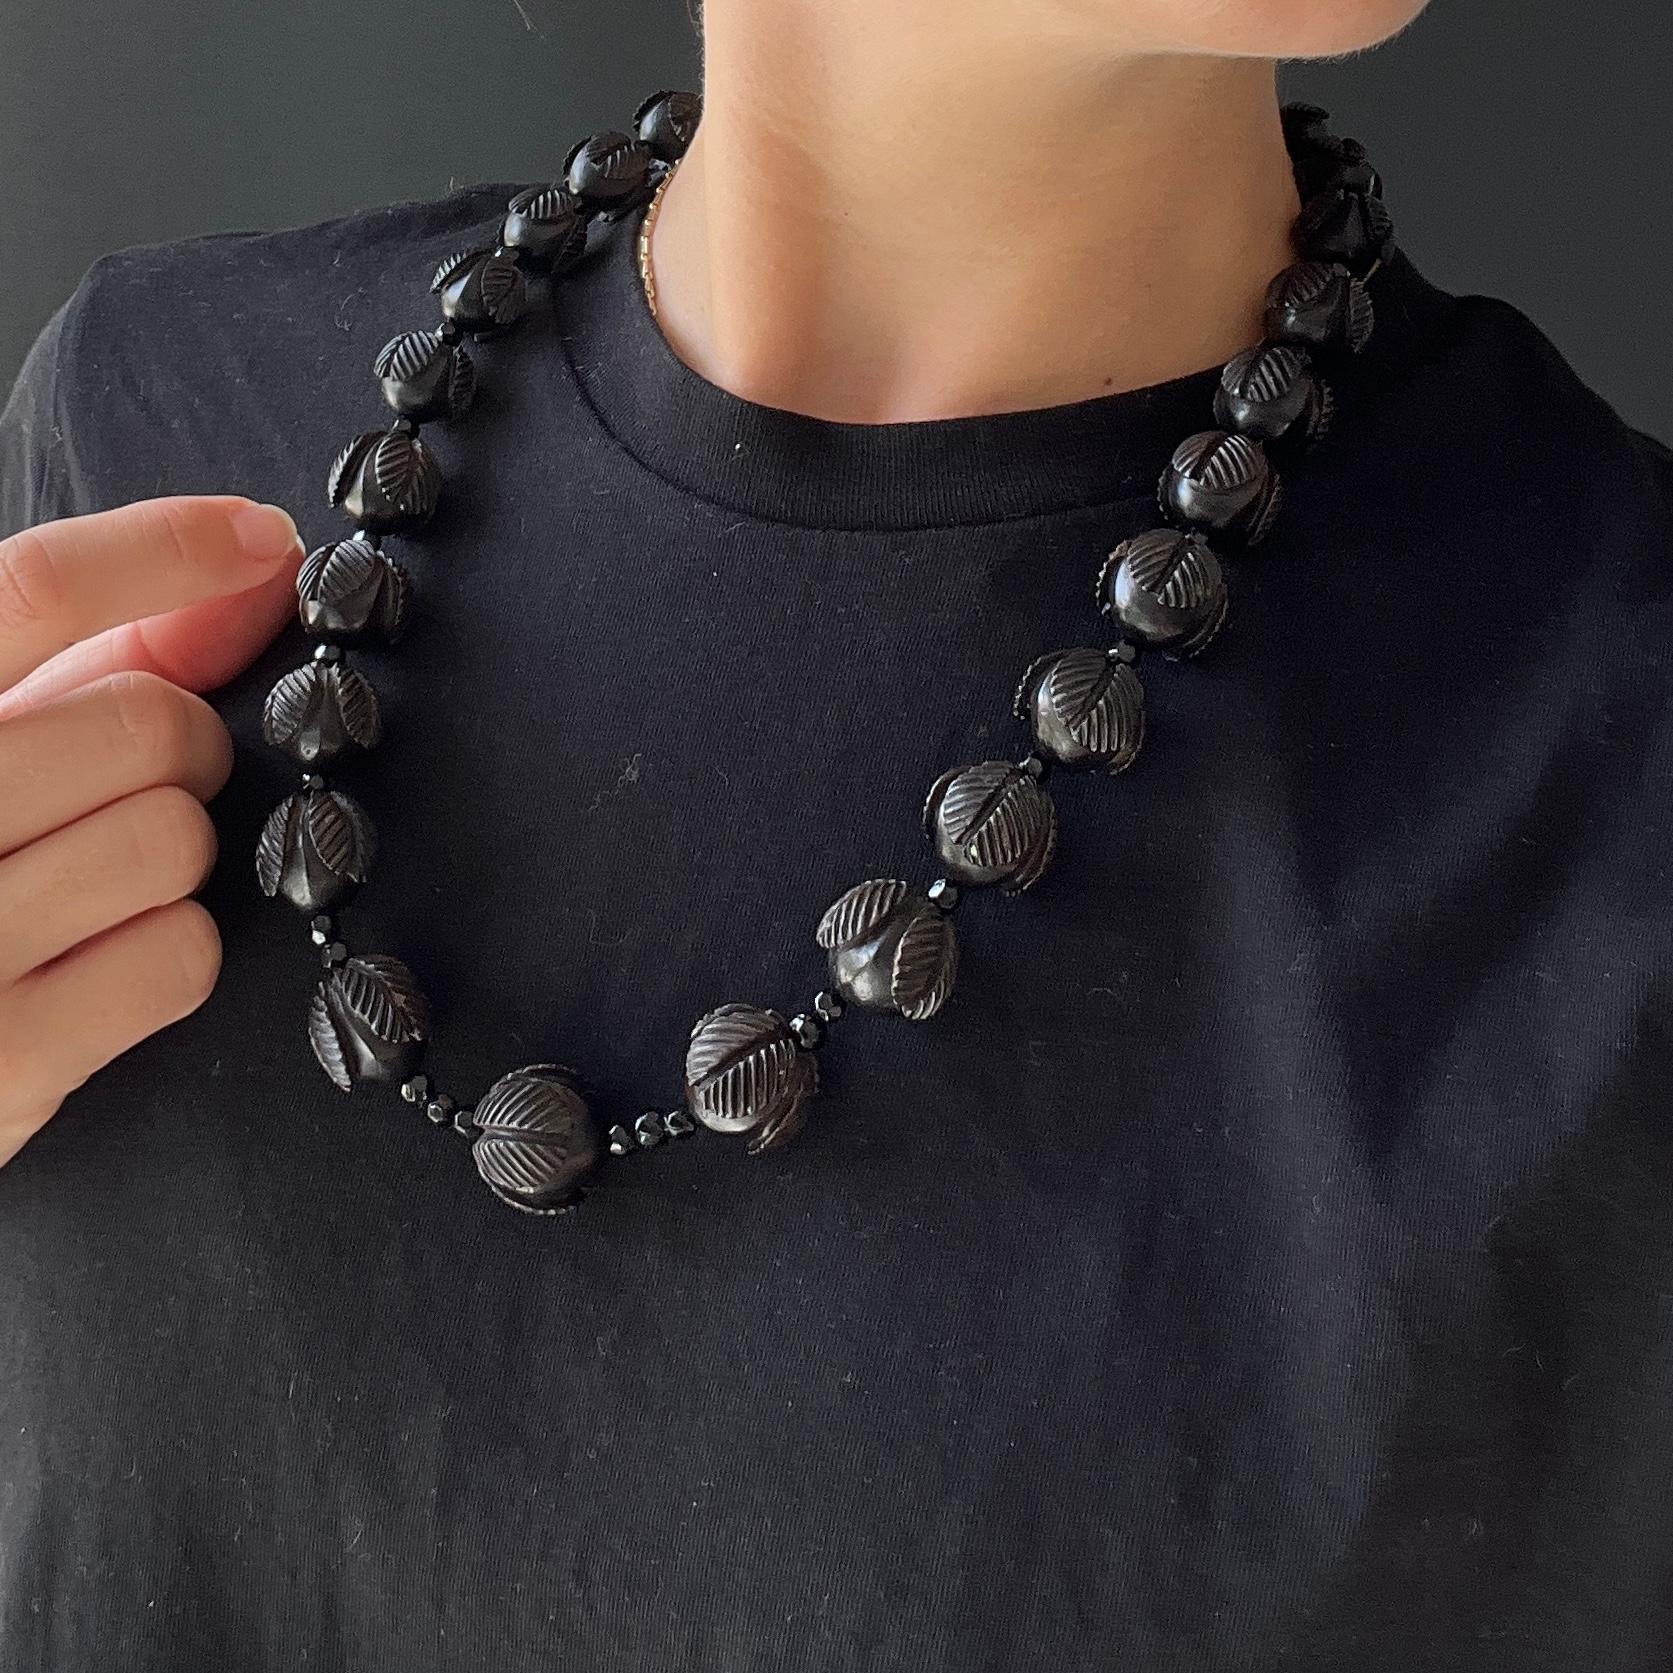 This stunning chunky necklace is held together by large bolt clasp. The beads graduate in size, starting large at the centre and the smallest on the outer edges. 

Length: 58.5cm 
Largest Bead Diameter: 20mm
Smallest Bead Diameter: 12mm 

Weight: 57g